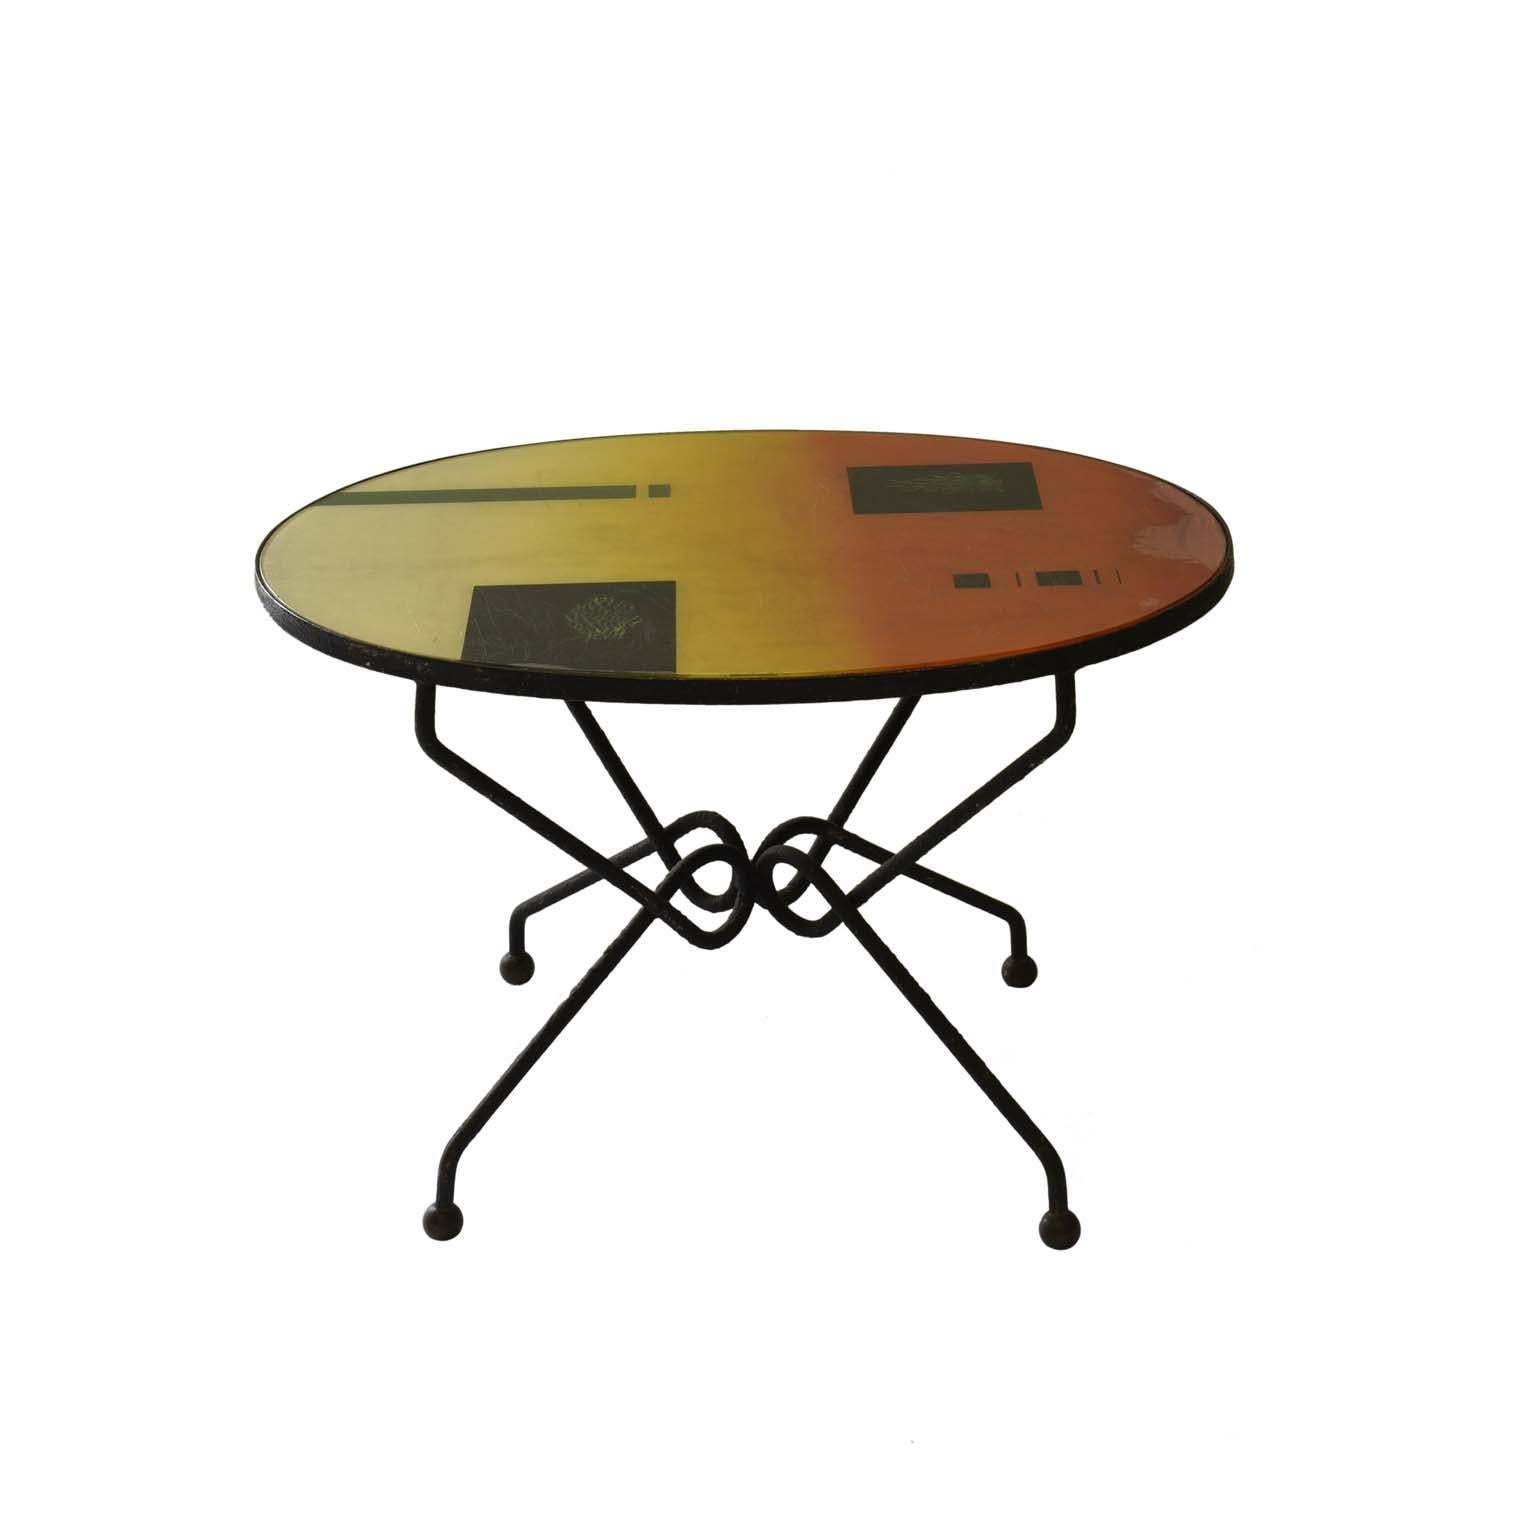 Mid-Century Modern Midcentury Brazilian Side Table with Colorful Graphics, 1970s